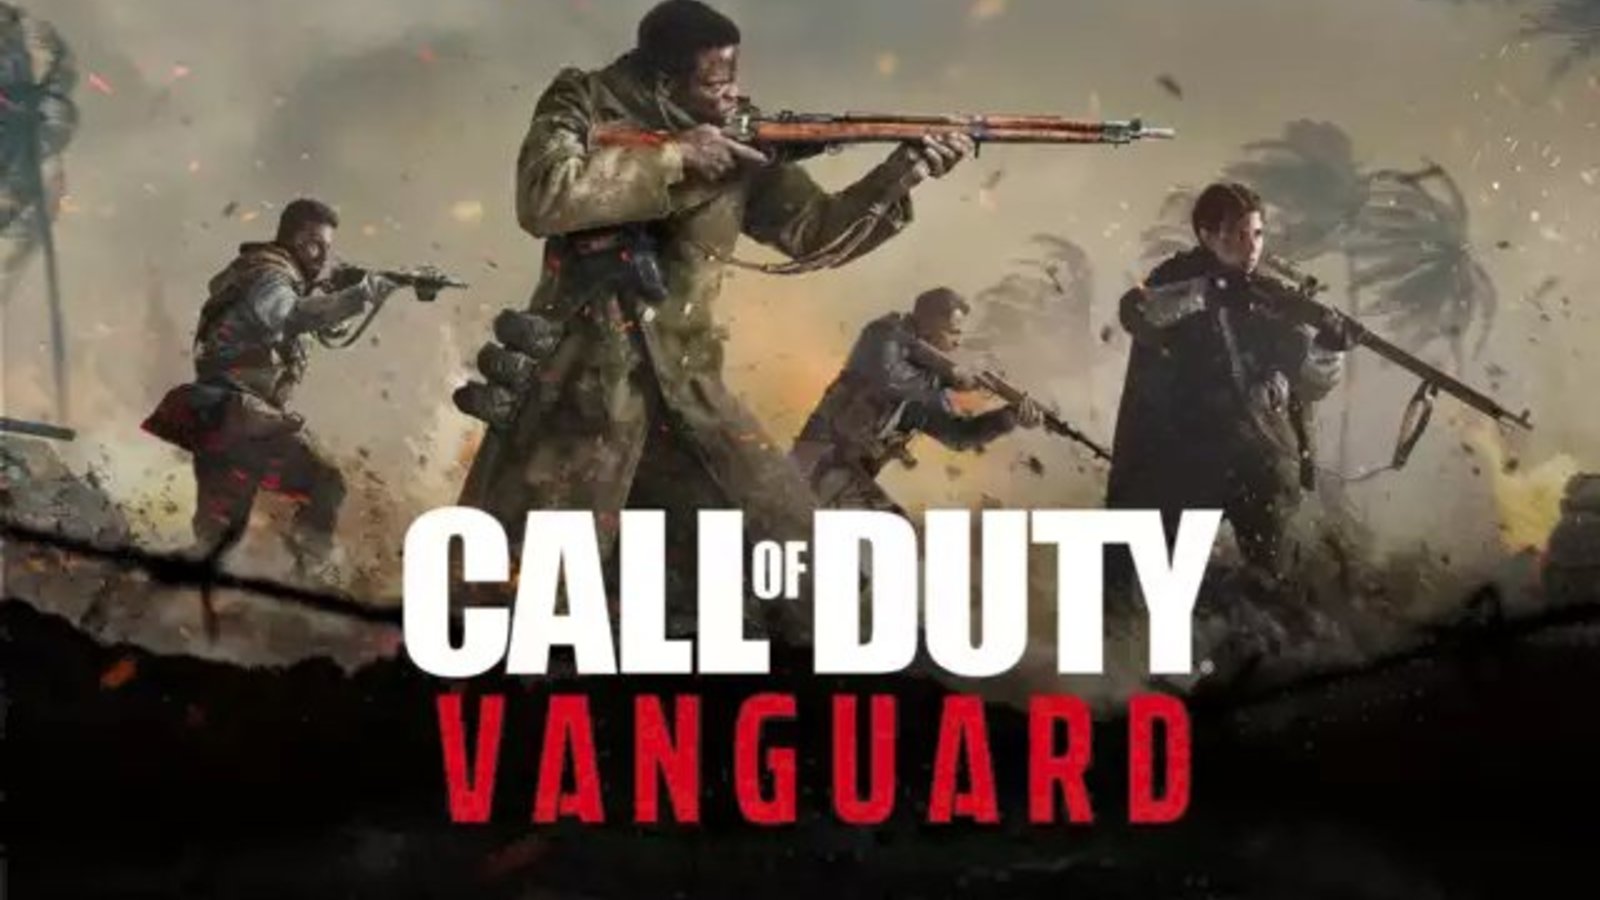 Call of Duty Vanguard Reveal Event in Warzone! 